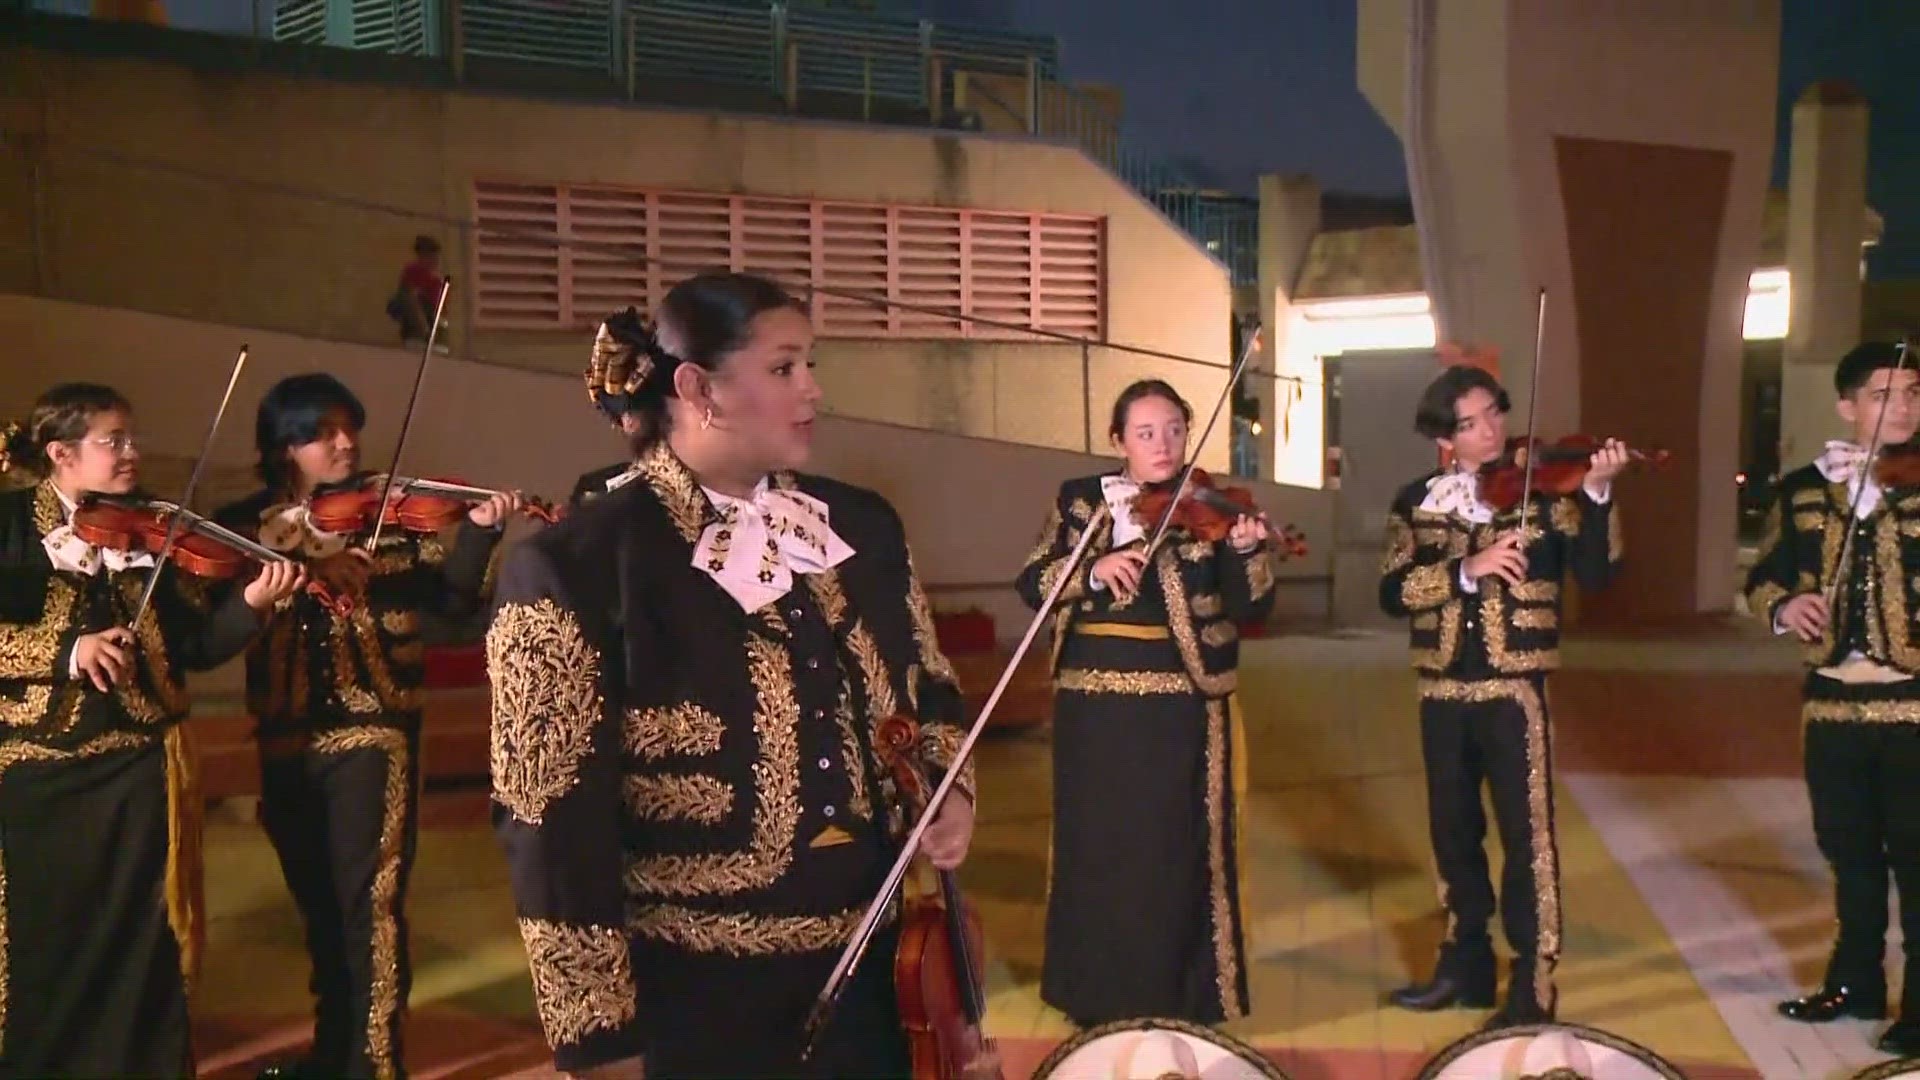 The Dies y Seis Mariachi Festival is taking place in Historic Market Square.